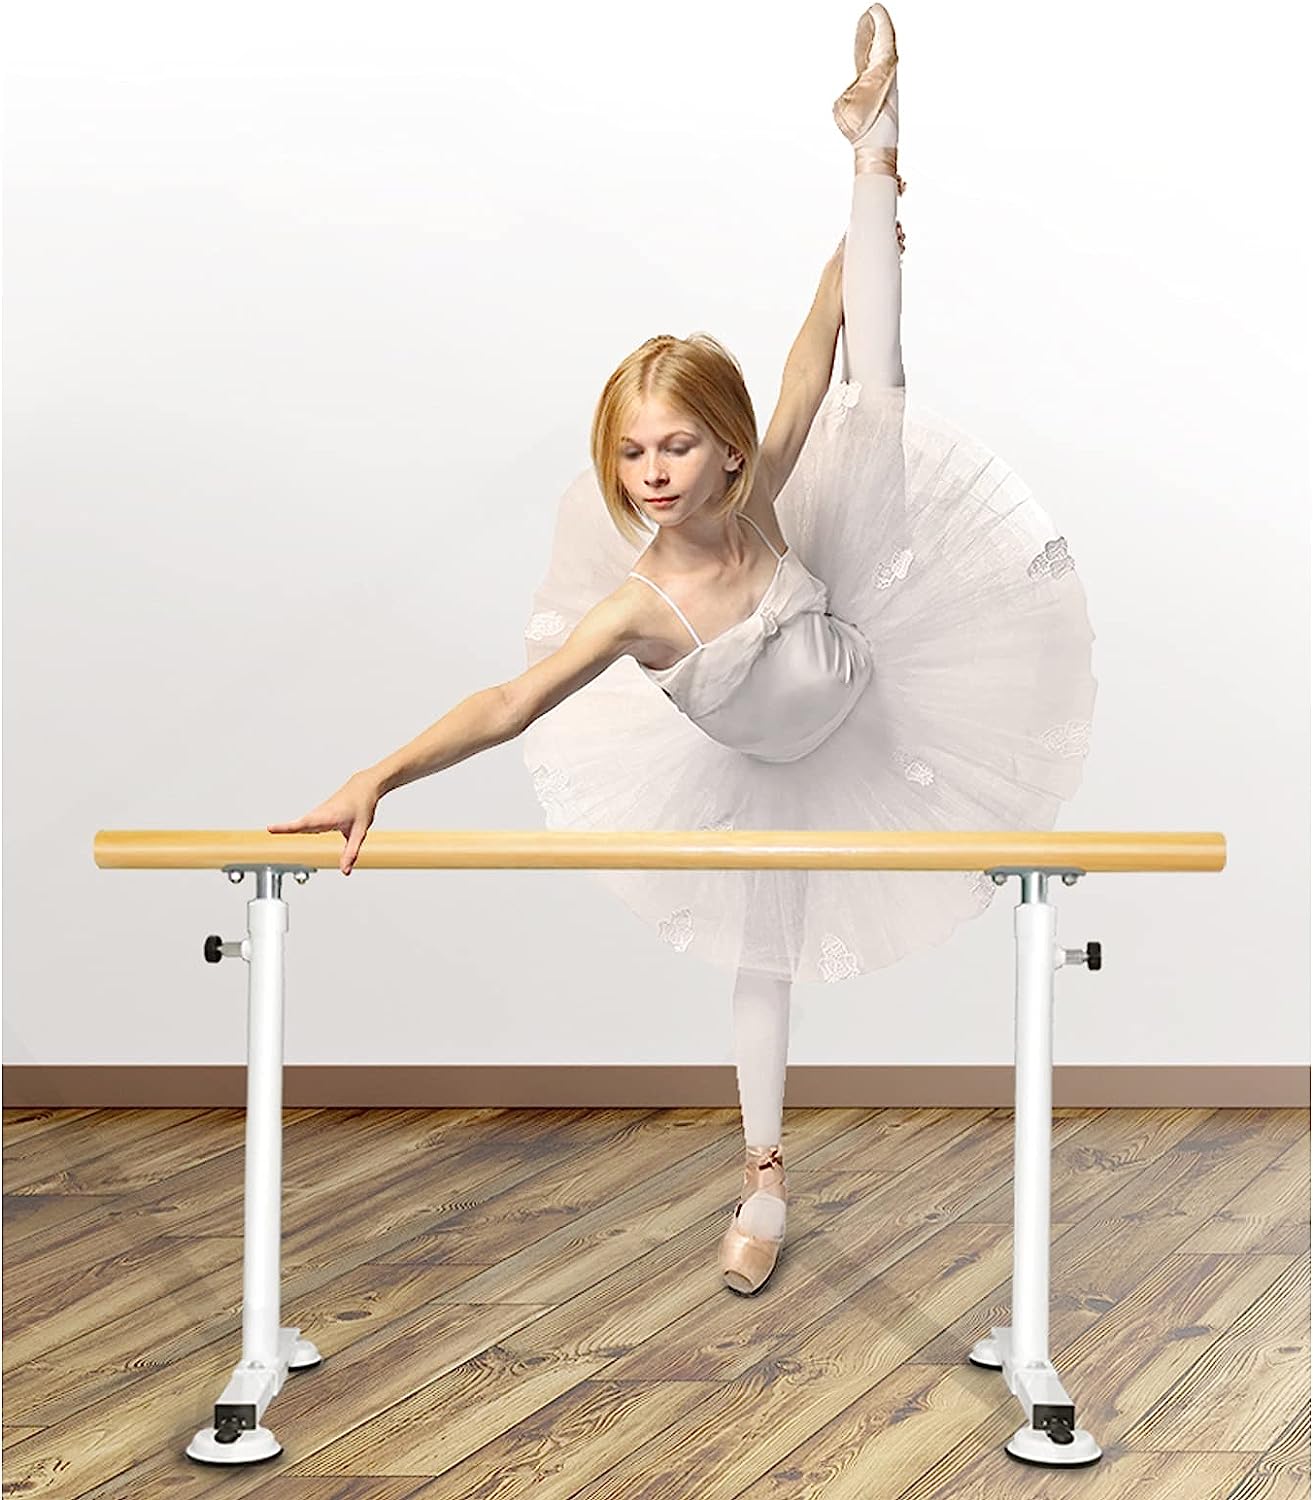 Adjustable Dance Stick, Freestanding Portable Ballet Barre with Non-Slip Foot, Single Ballet Bar Equipment for Exercise Stretching (Color : Pink, Size : 1.5 m) (White 1.5 m)